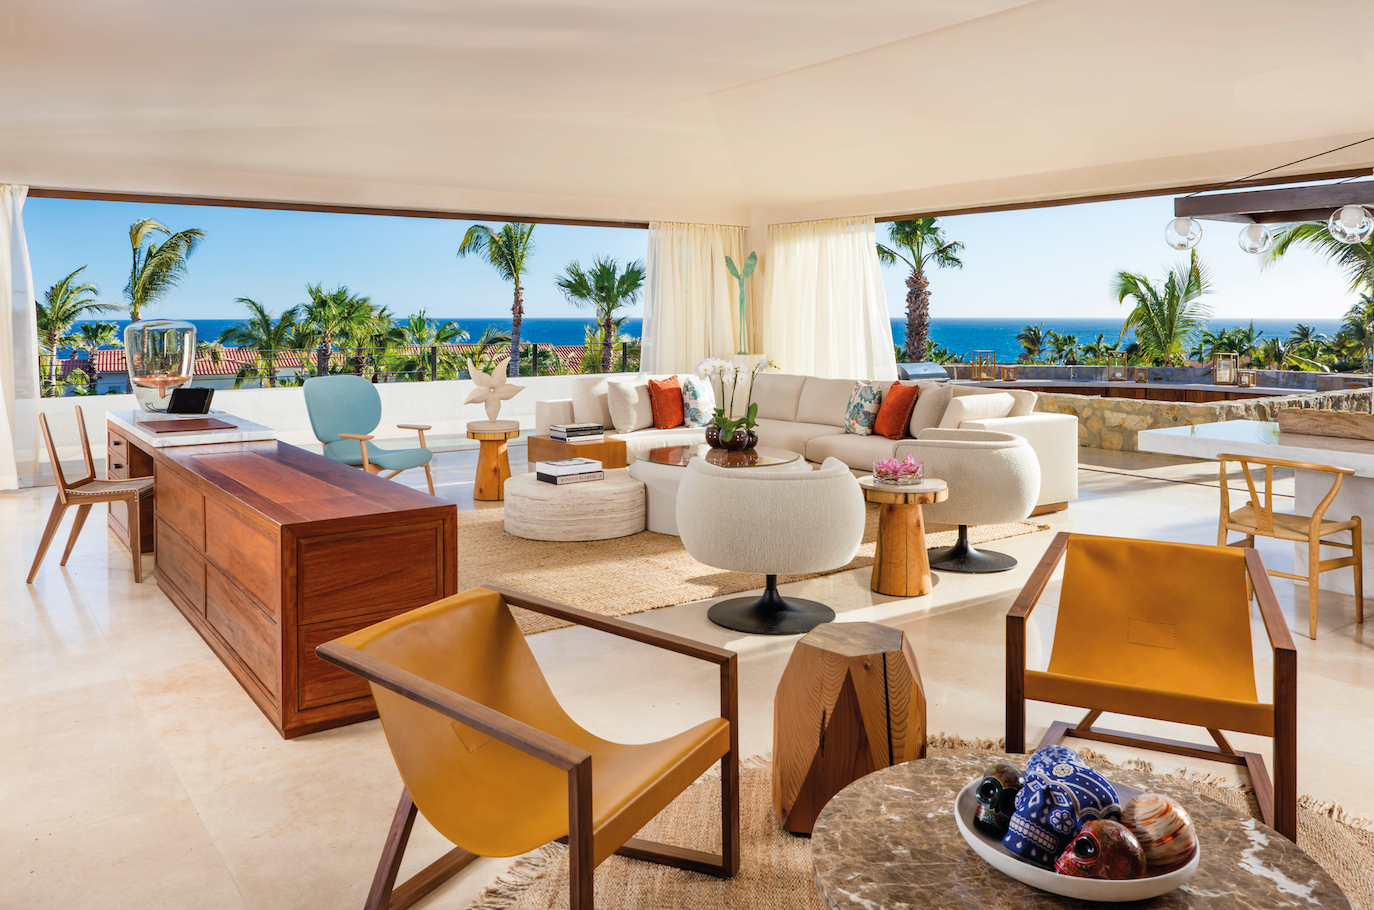 Villa One, One&Only Palmilla, Mexico